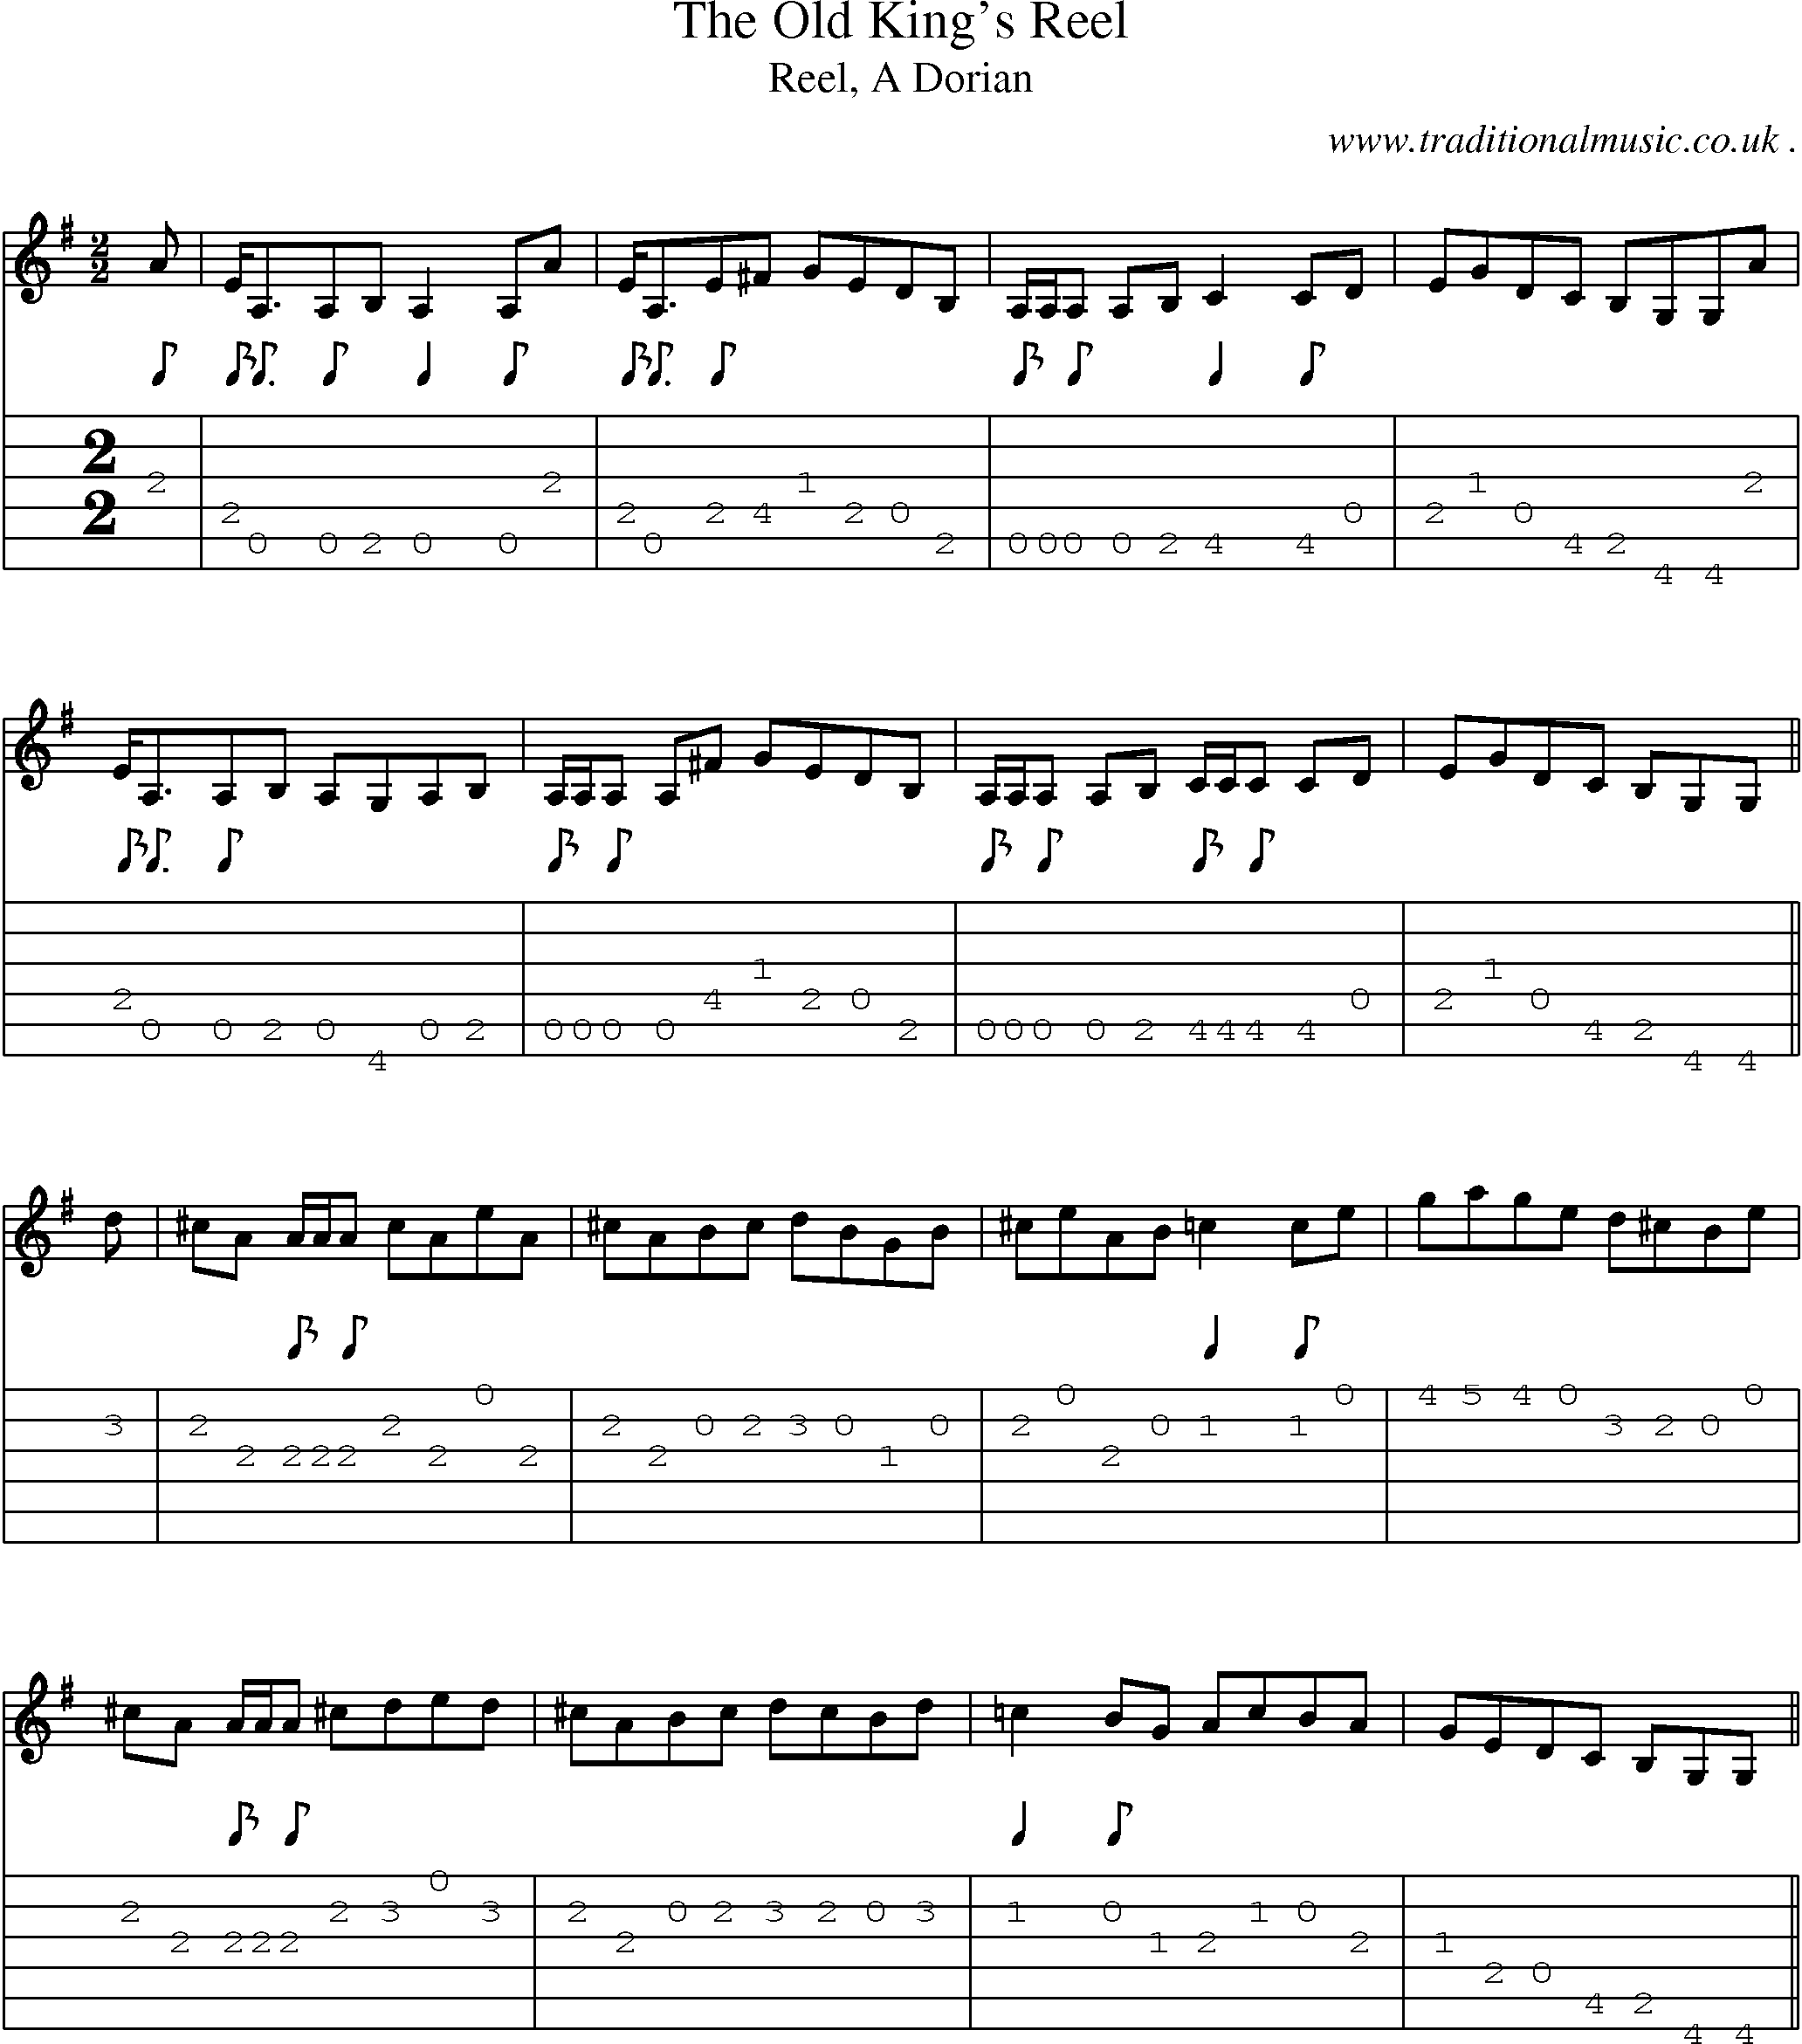 Sheet-music  score, Chords and Guitar Tabs for The Old Kings Reel1